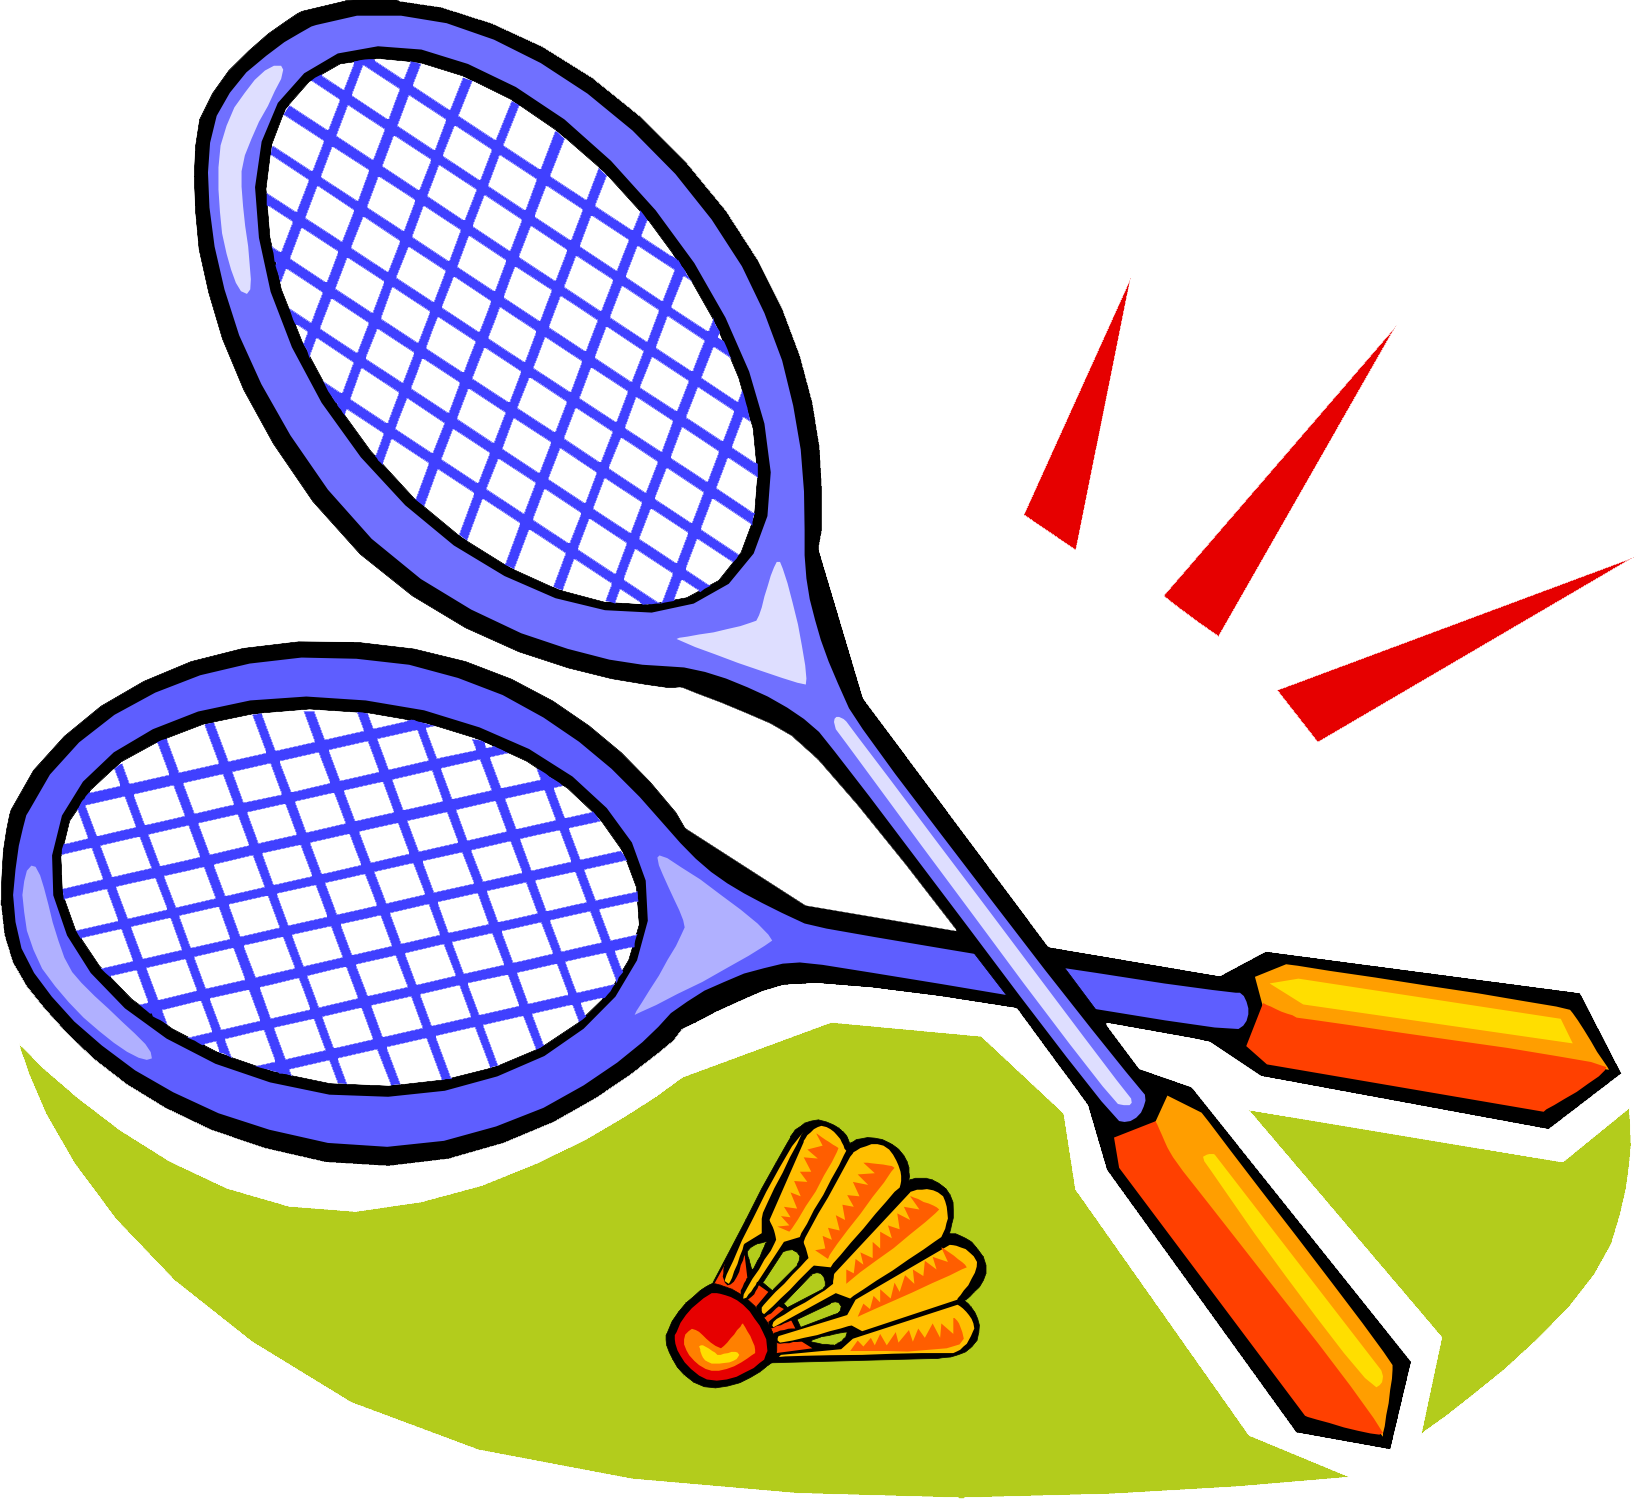 Sports clipart racket sport. Pin by inesseyka on